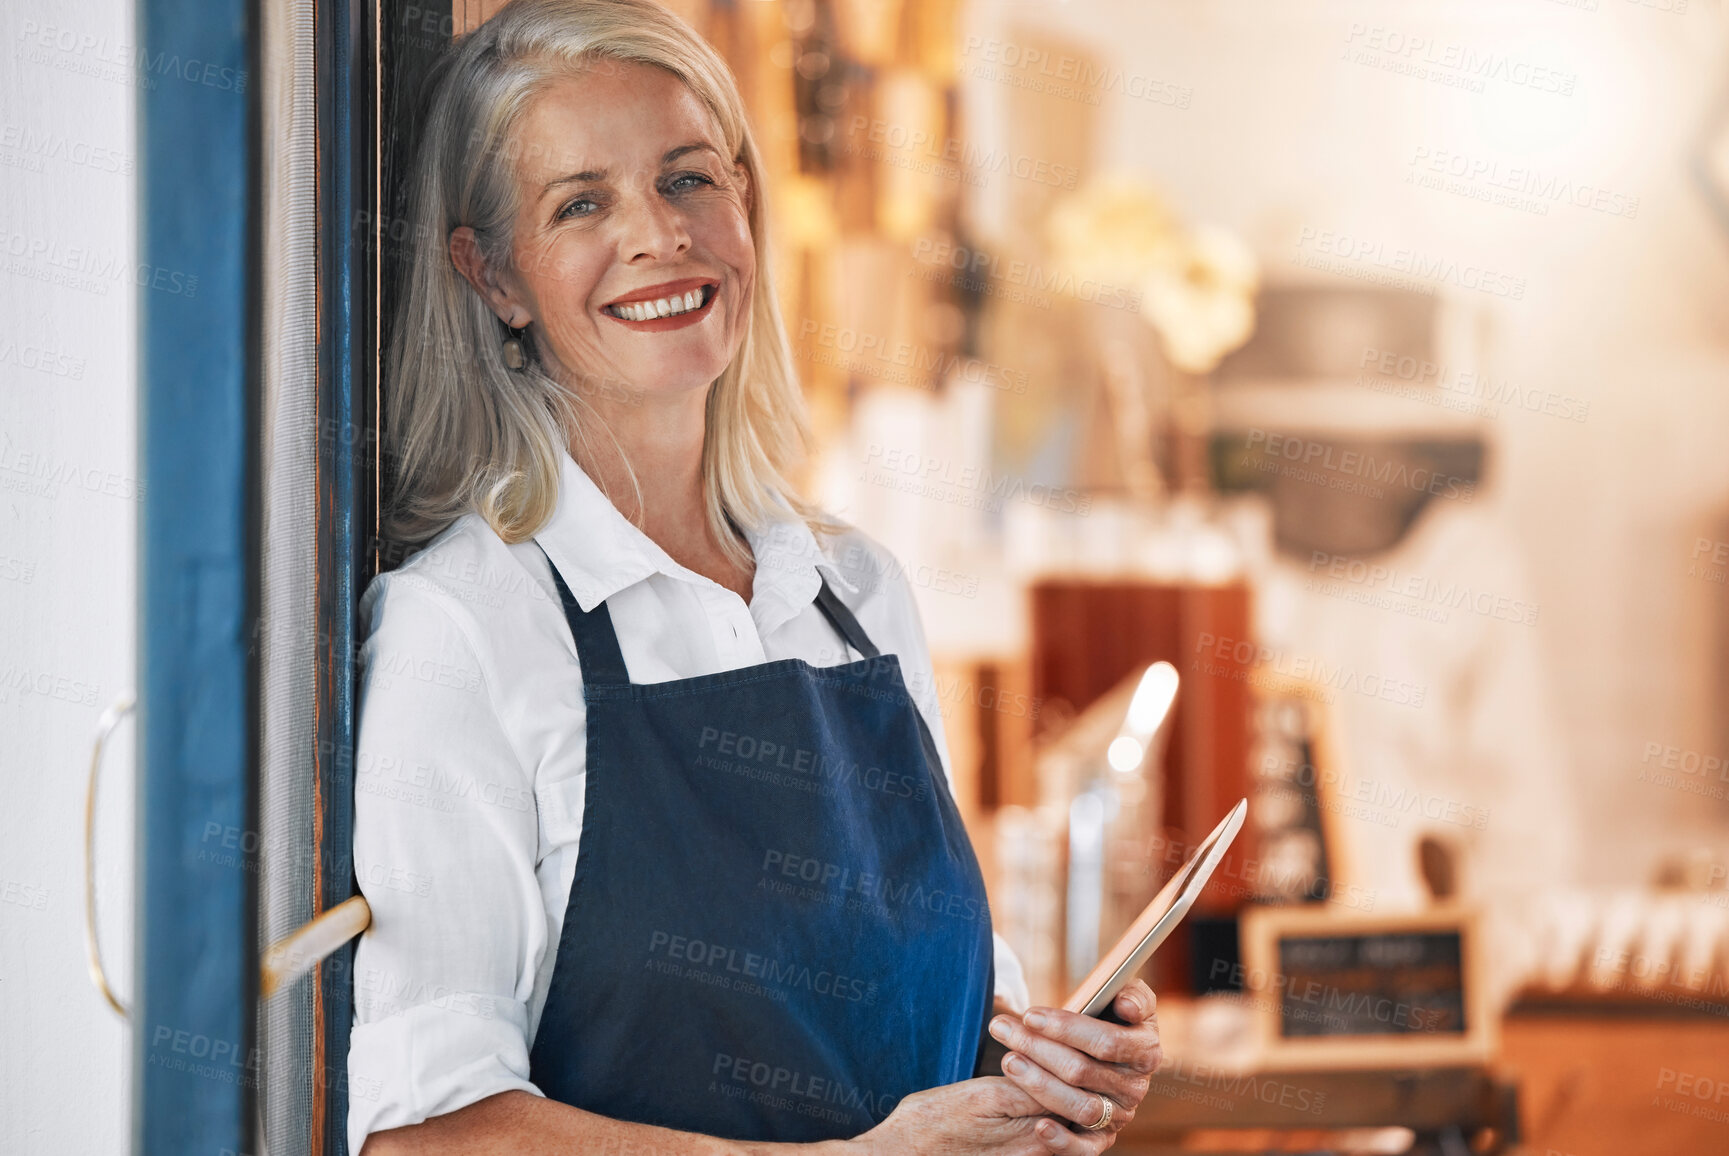 Buy stock photo Senior, store and owner portrait with tablet excited, happy and optimistic with shop career venture. Sales, small business and happiness of mature woman at shop entrance with welcoming smile.

